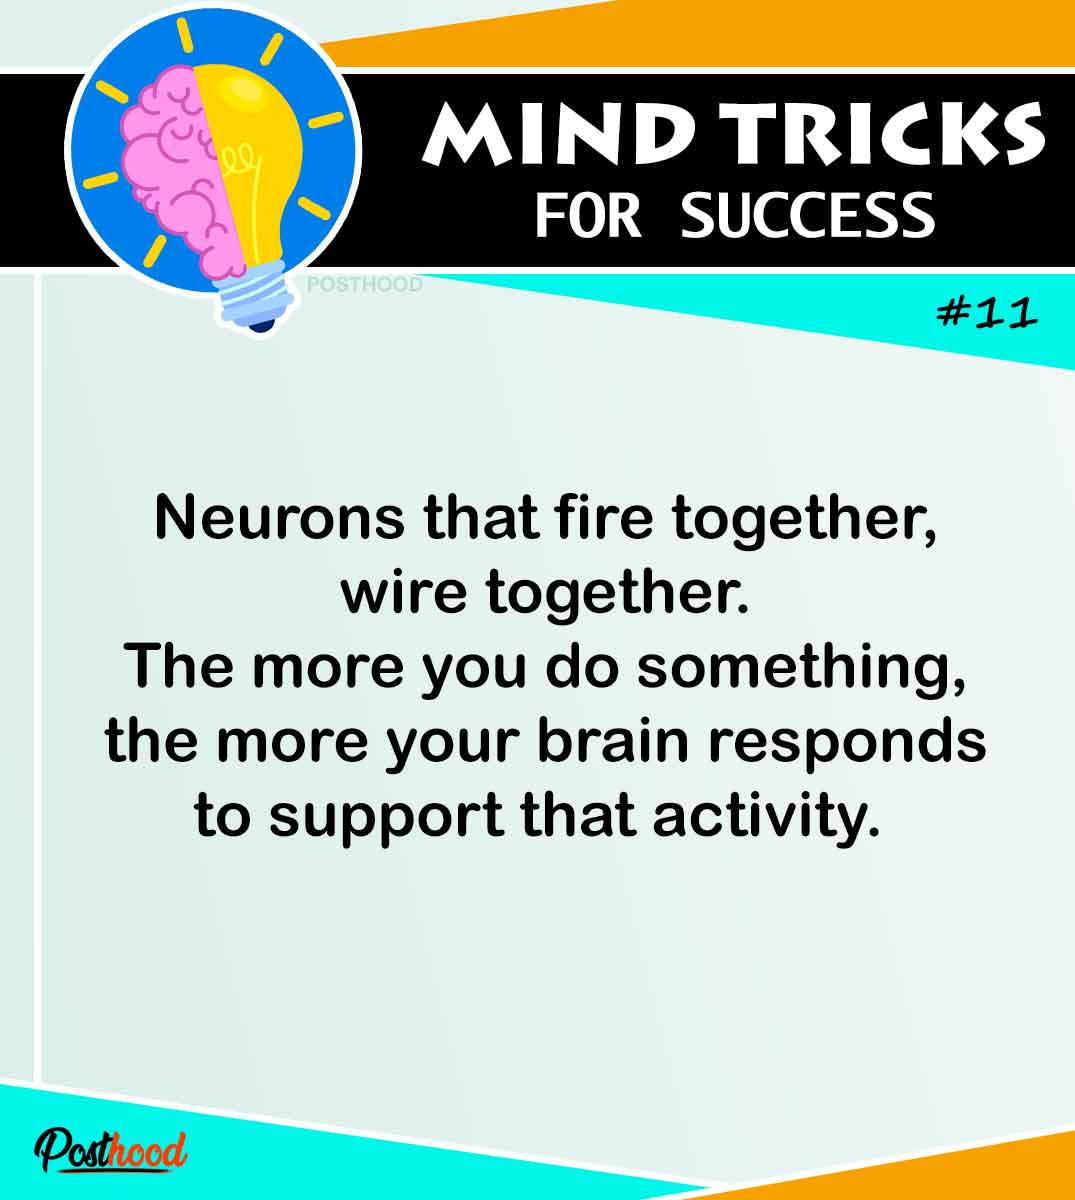 Train your mind to develop a new mindset and success habits to achieve your goals. Best mind tricks for success and greatness.